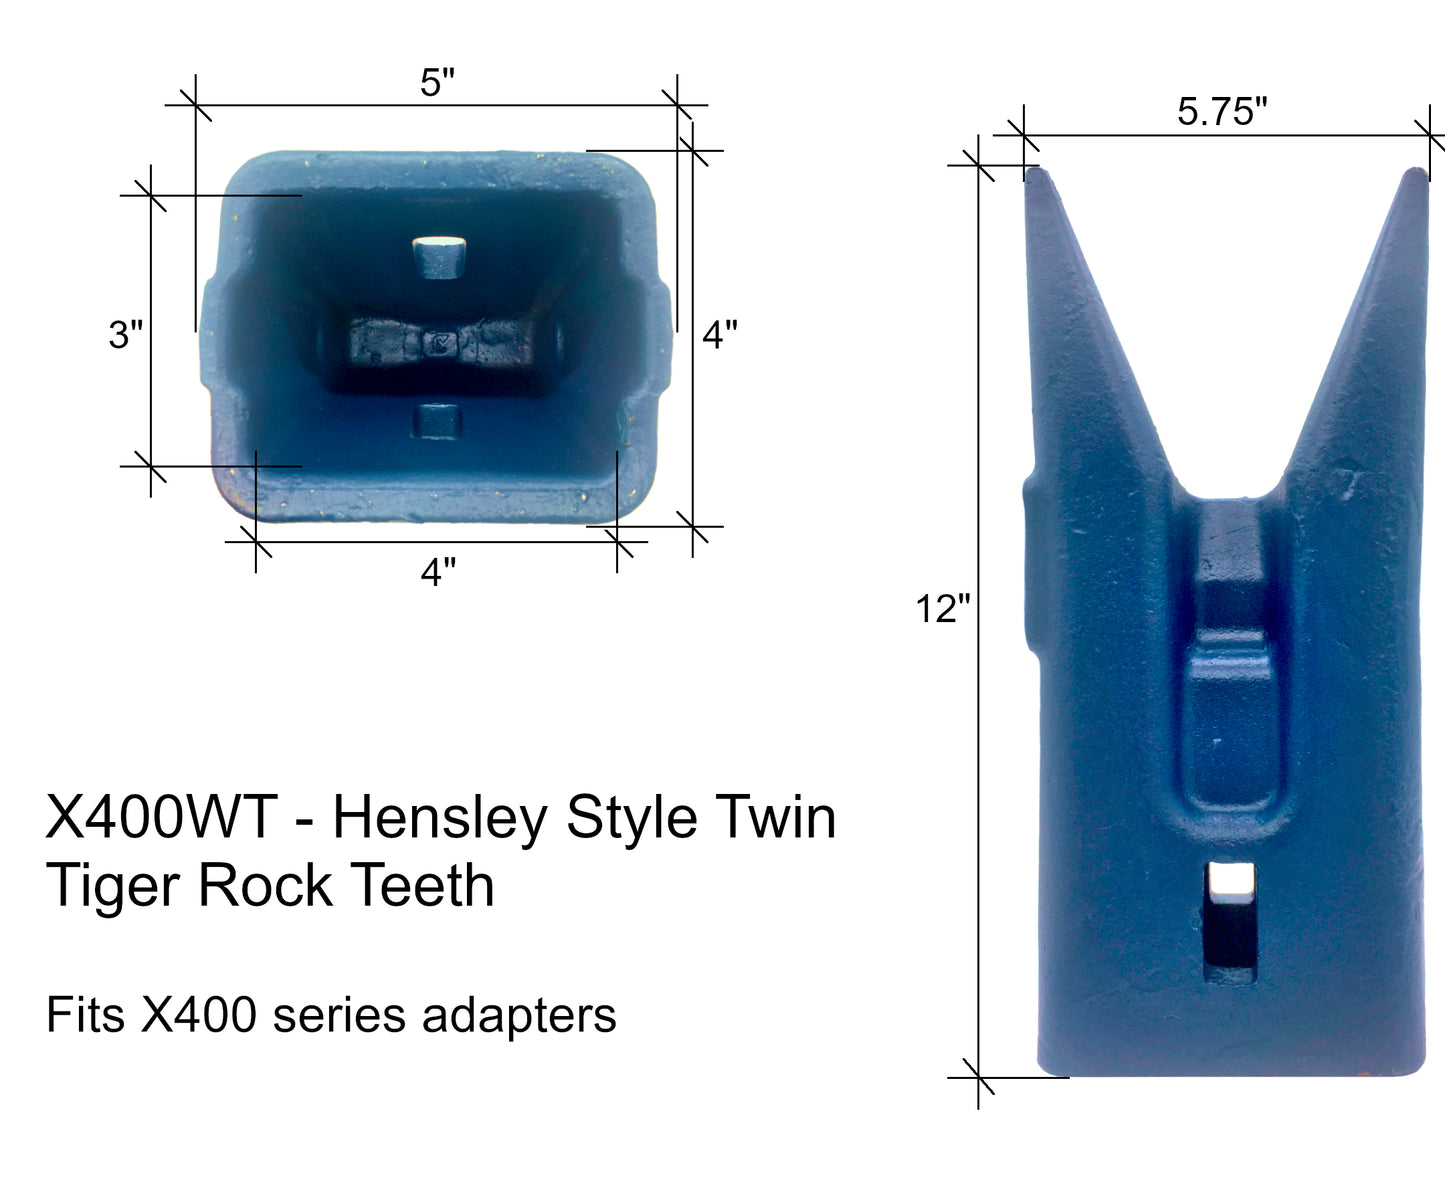 X400WT Twin Tiger Rock Tooth - 'Hensley X400 Style' for Excavator Buckets